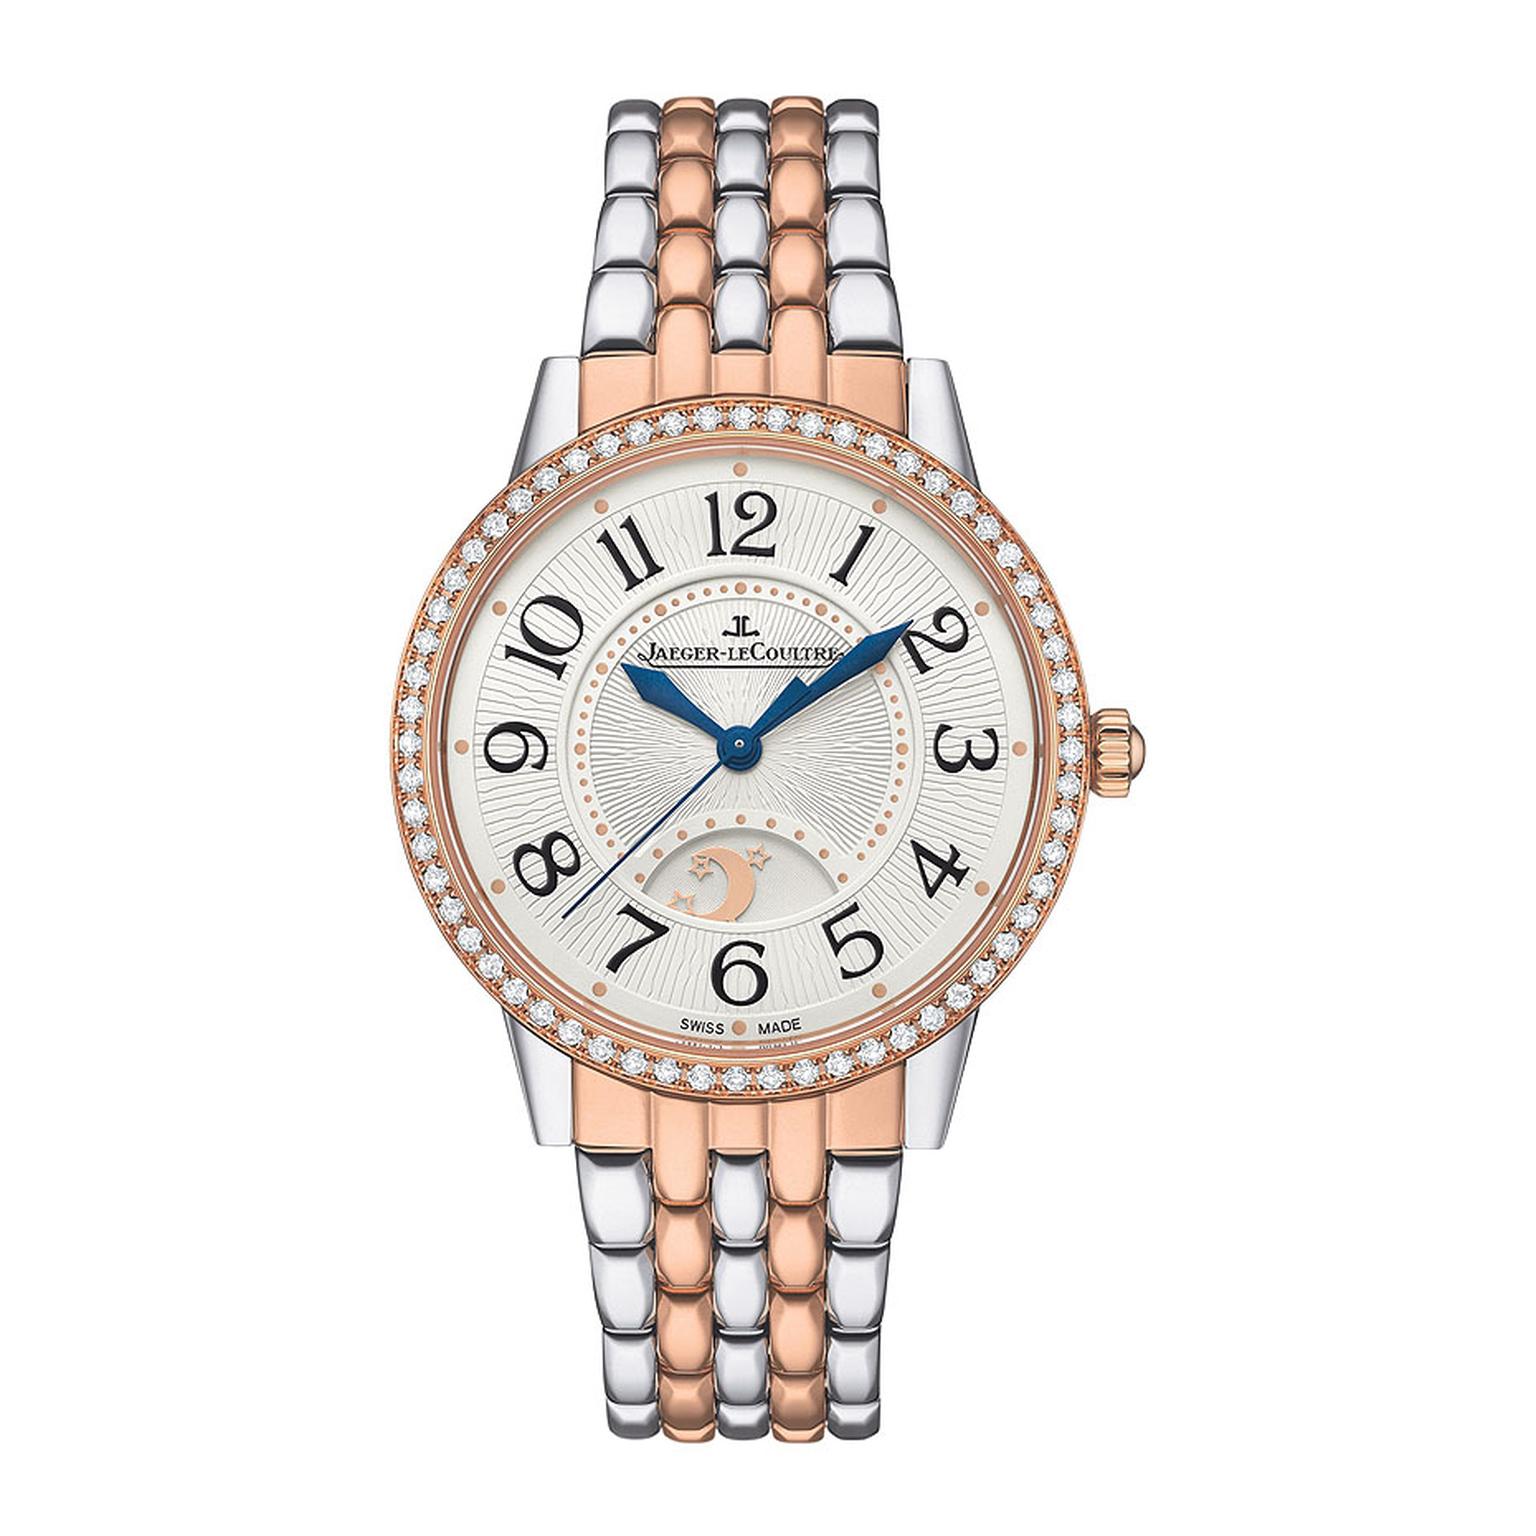 Jaeger Le-Coultre's new Rendez-Vous Night & Day ladies' watch is presented in a two-tone rose gold and stainless 34mm case and bracelet, with a silvered guilloché dial that features large 1930s-inspired numerals lit up by the diamond set bezel. It is fitt